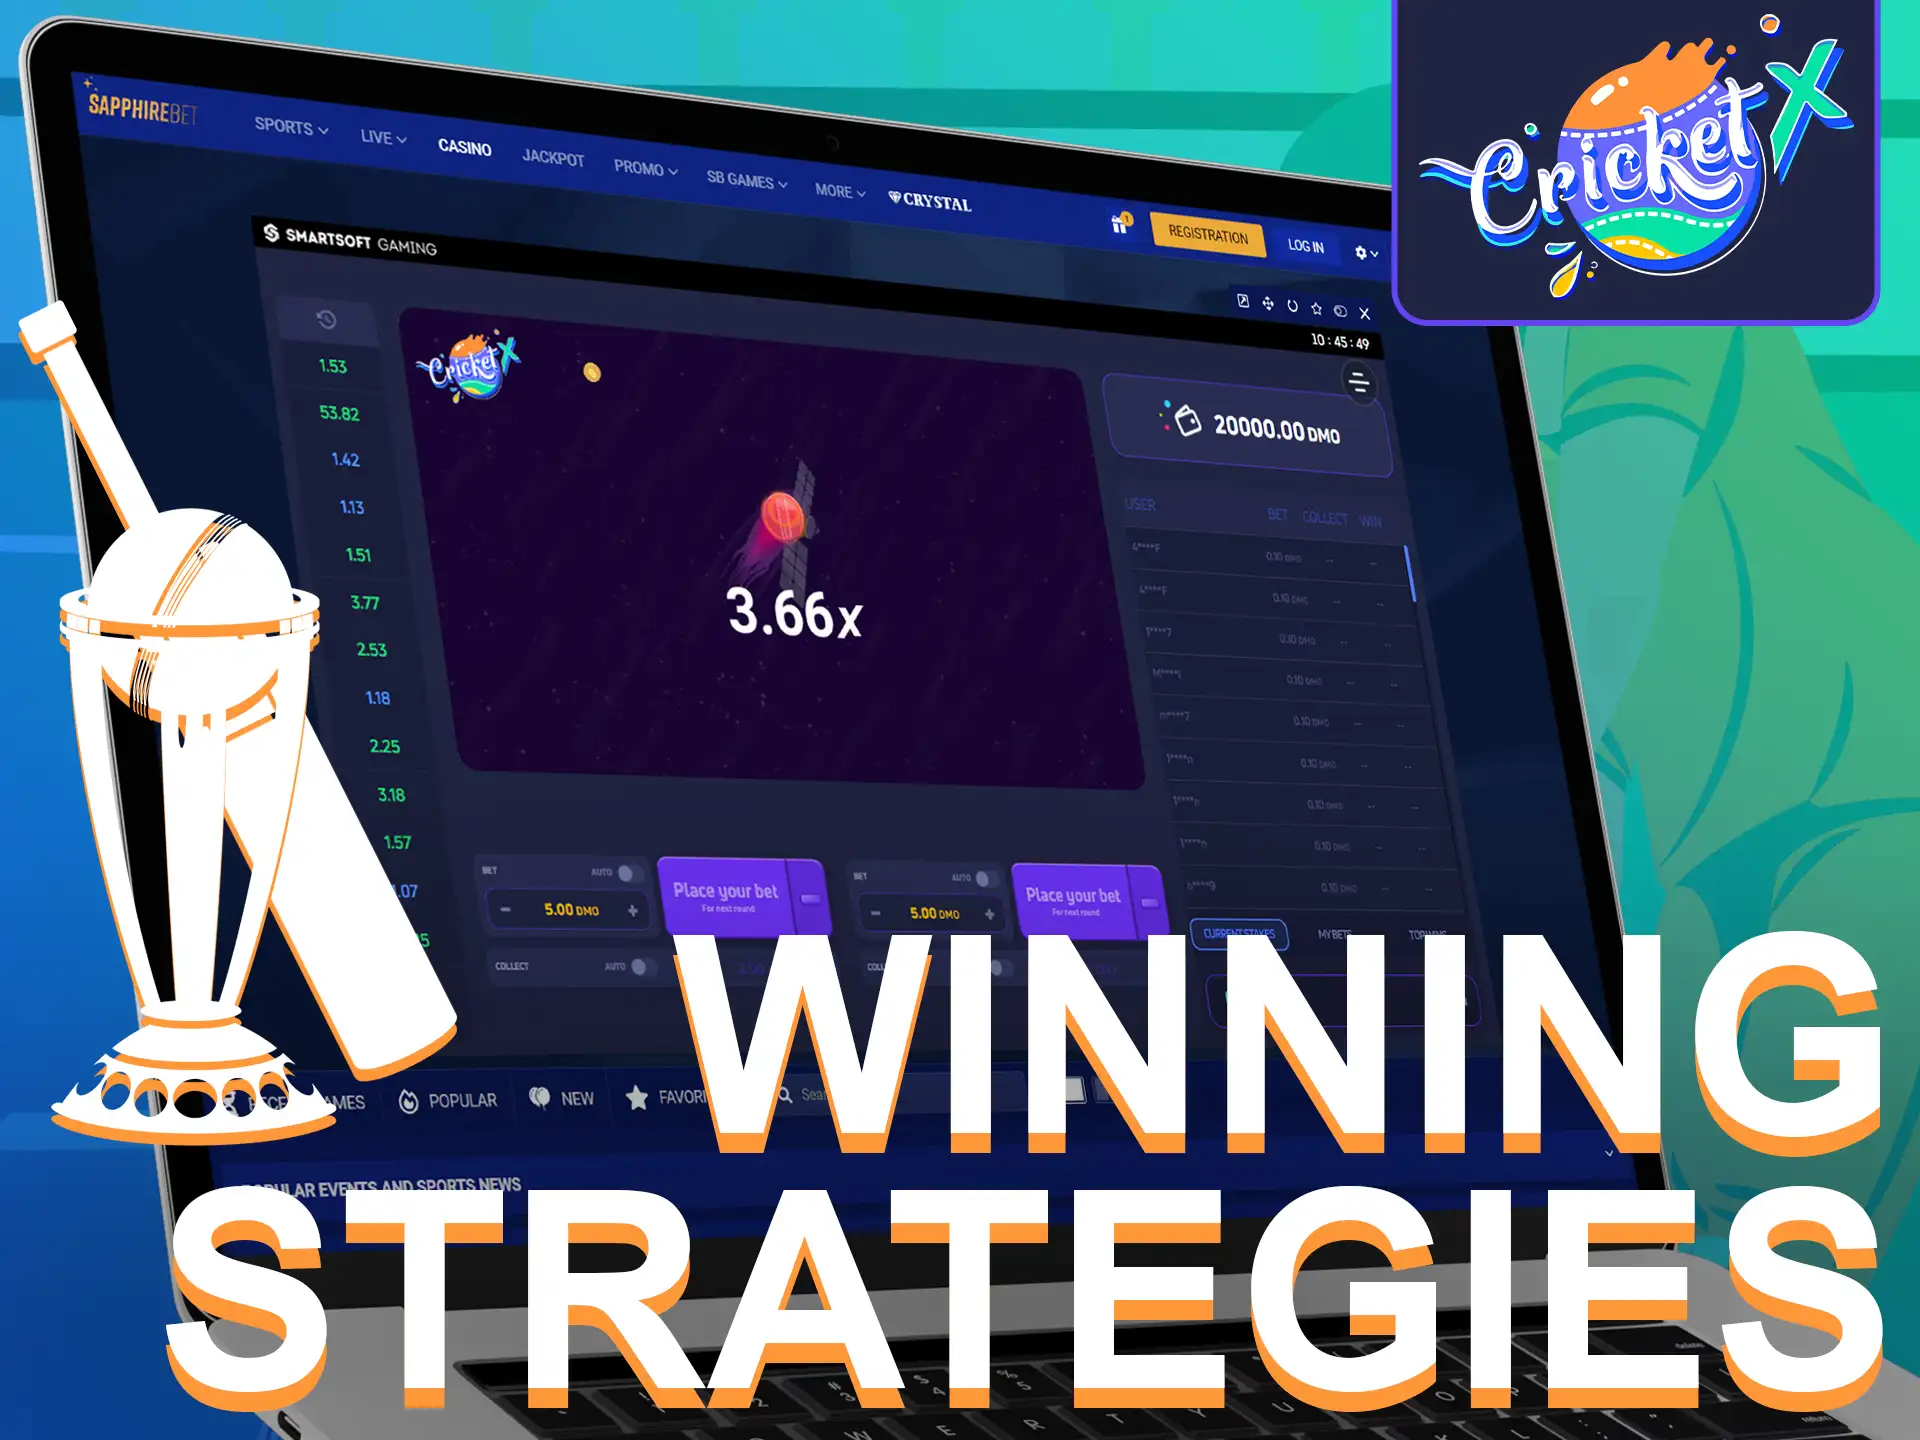 To win in the Cricket X game make your game strategy.